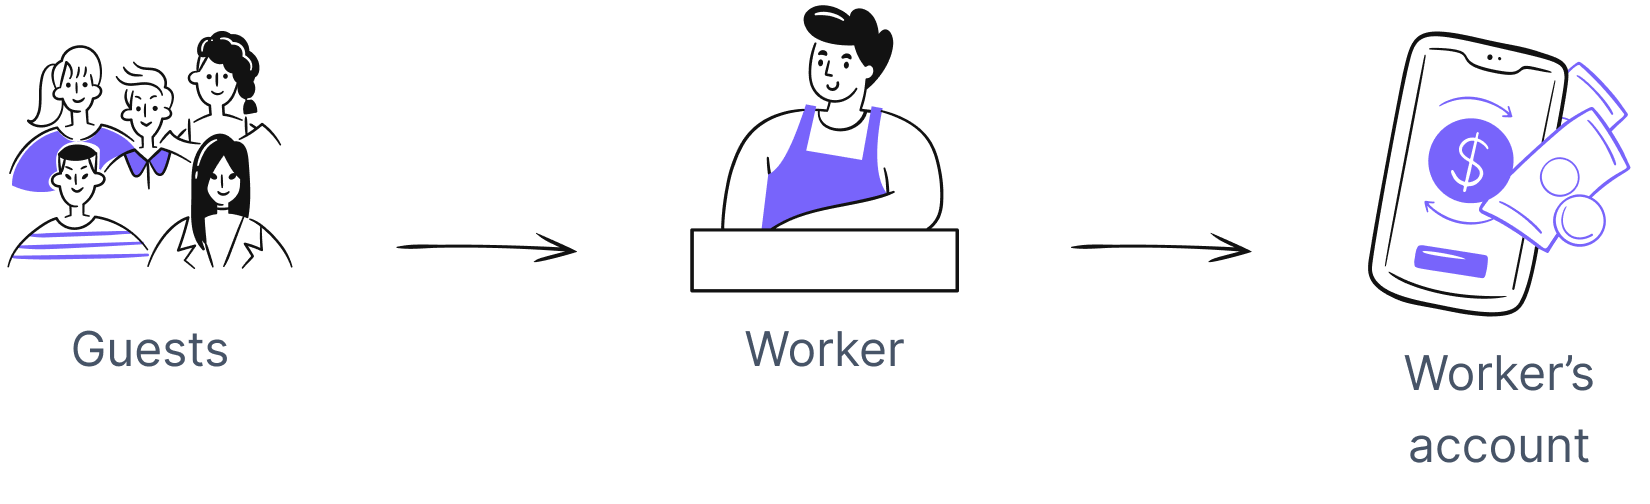 Individual workers account